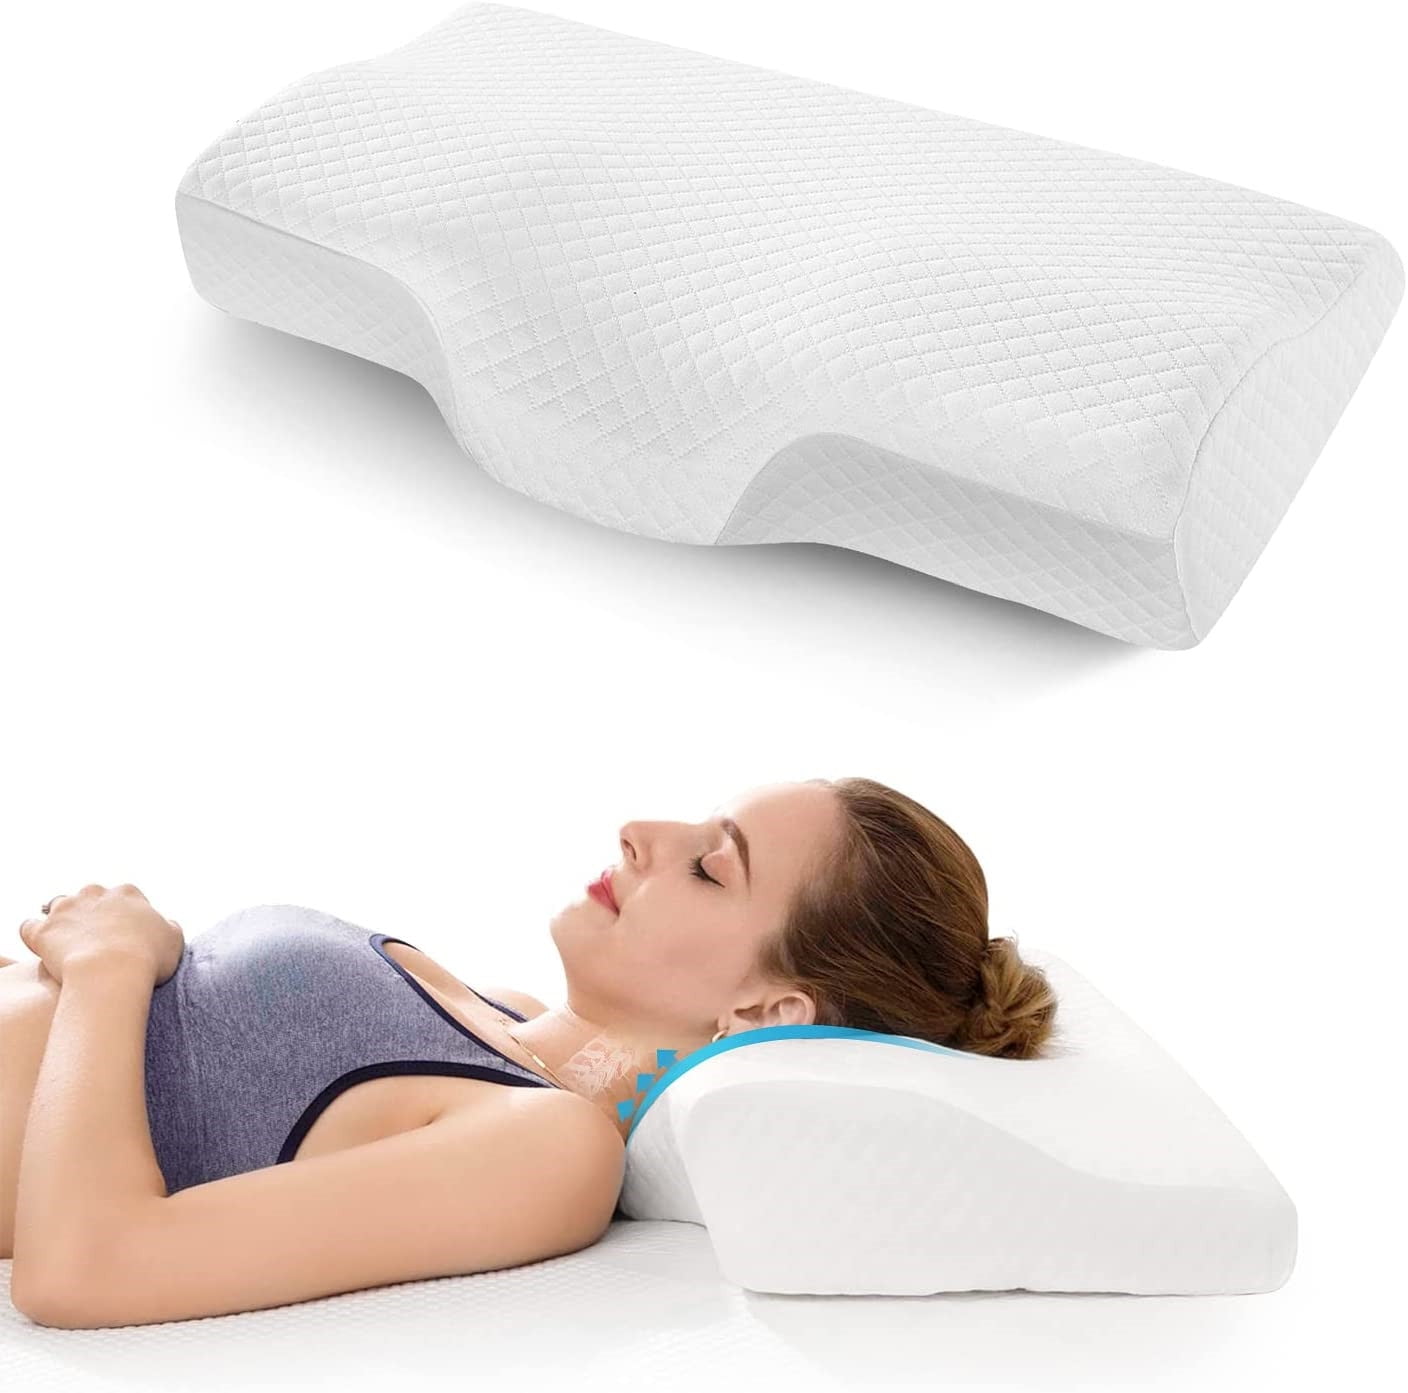 Orthopaedic Pillow Head Neck Support Bamboo Contour Memory Foam Pillow 2 Sizes 